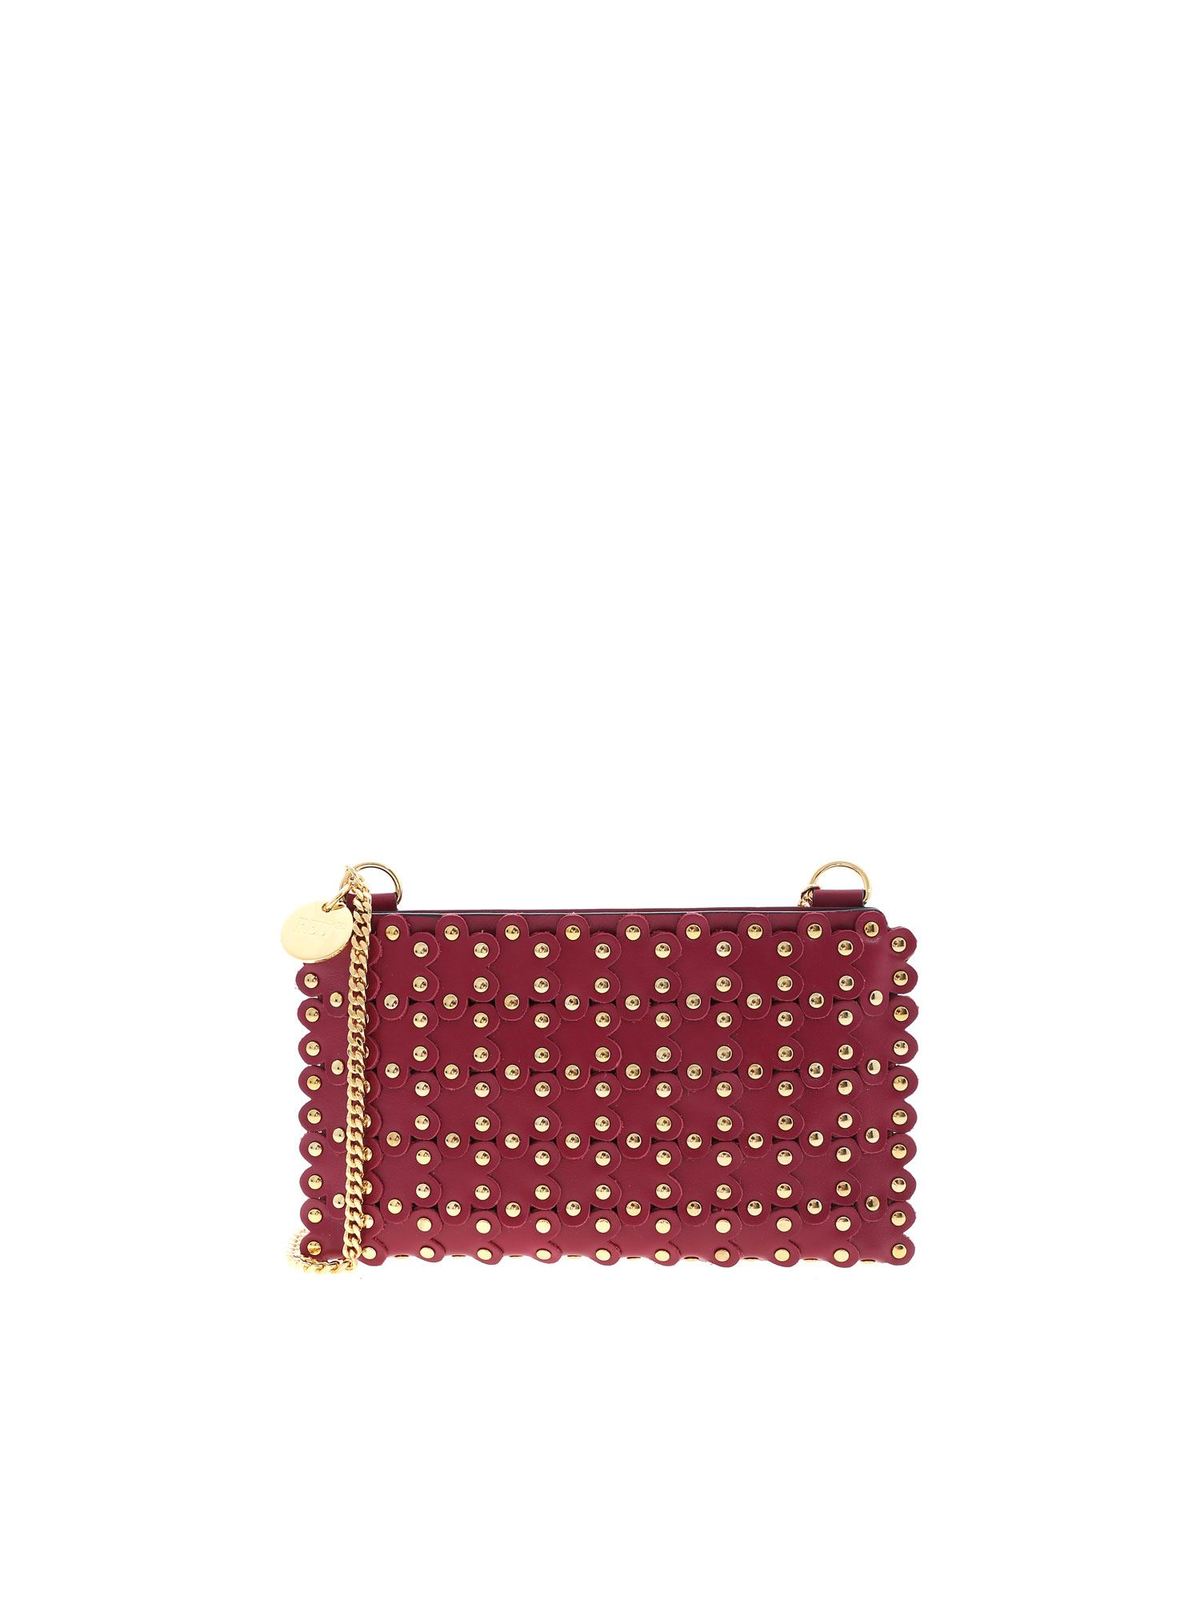 RED VALENTINO FLOWER PUZZLE CLUTCH BAG IN BURGUNDY